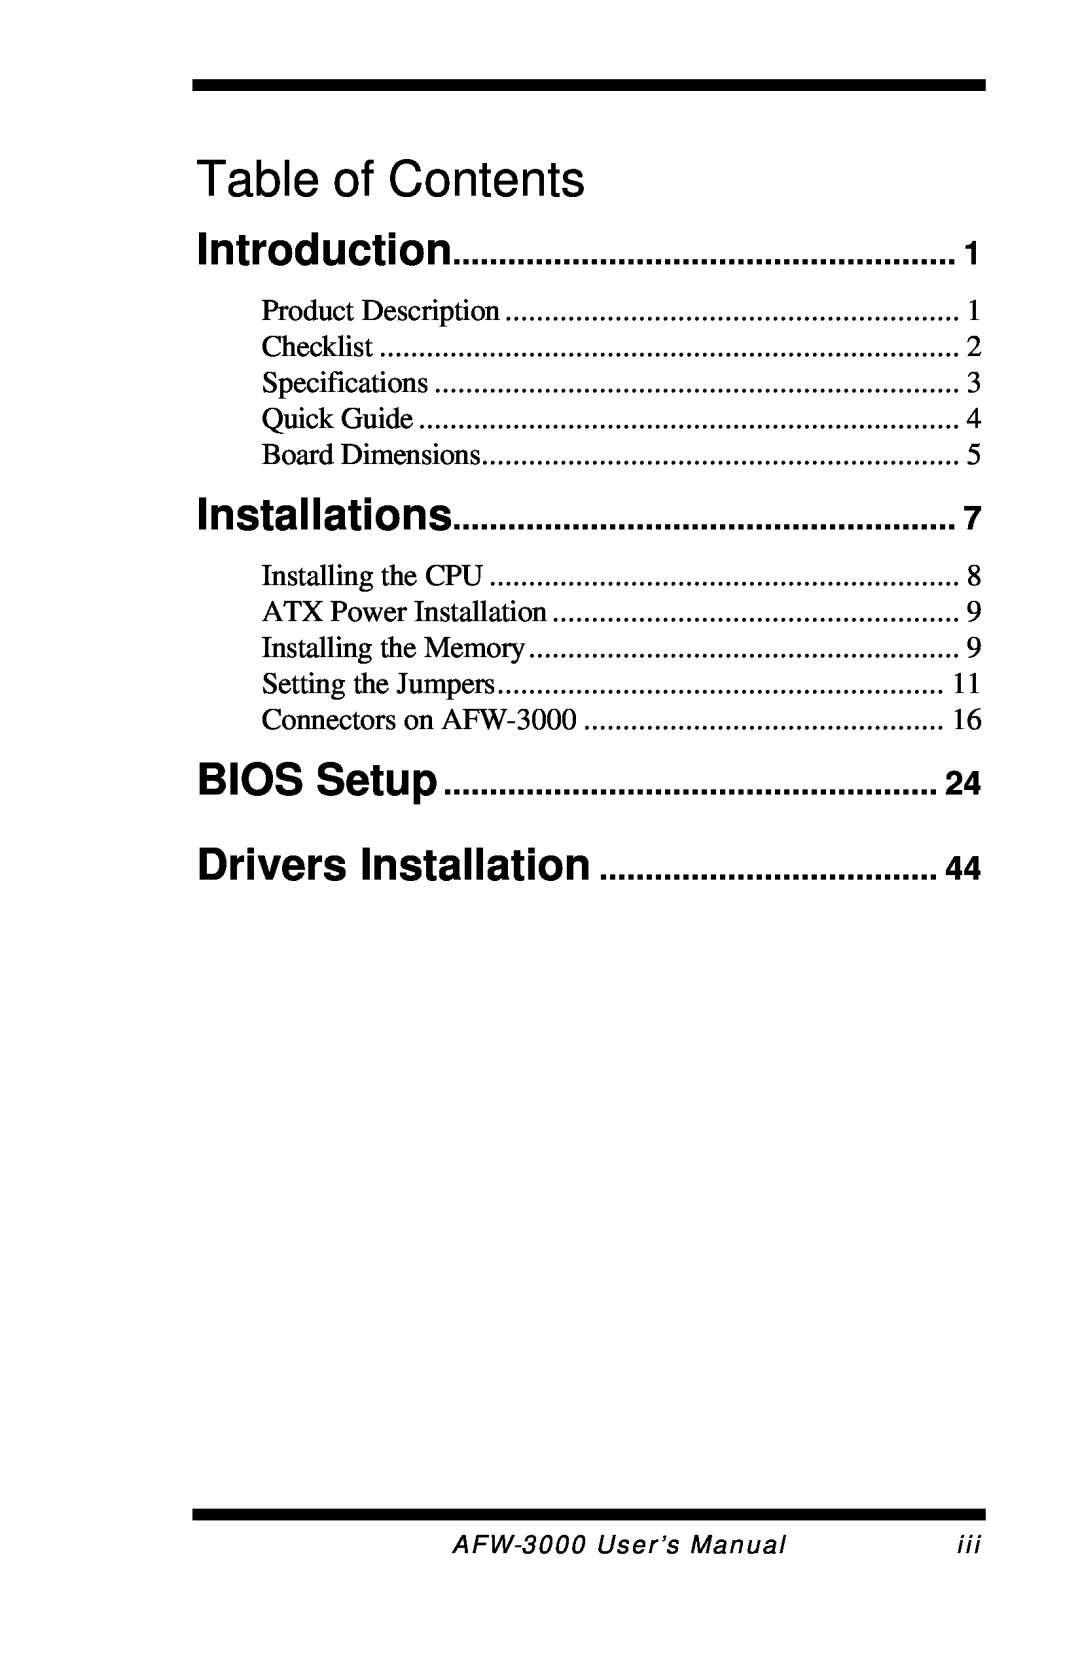 Intel E7501 user manual Introduction, Installations, BIOS Setup, Drivers Installation, Table of Contents 